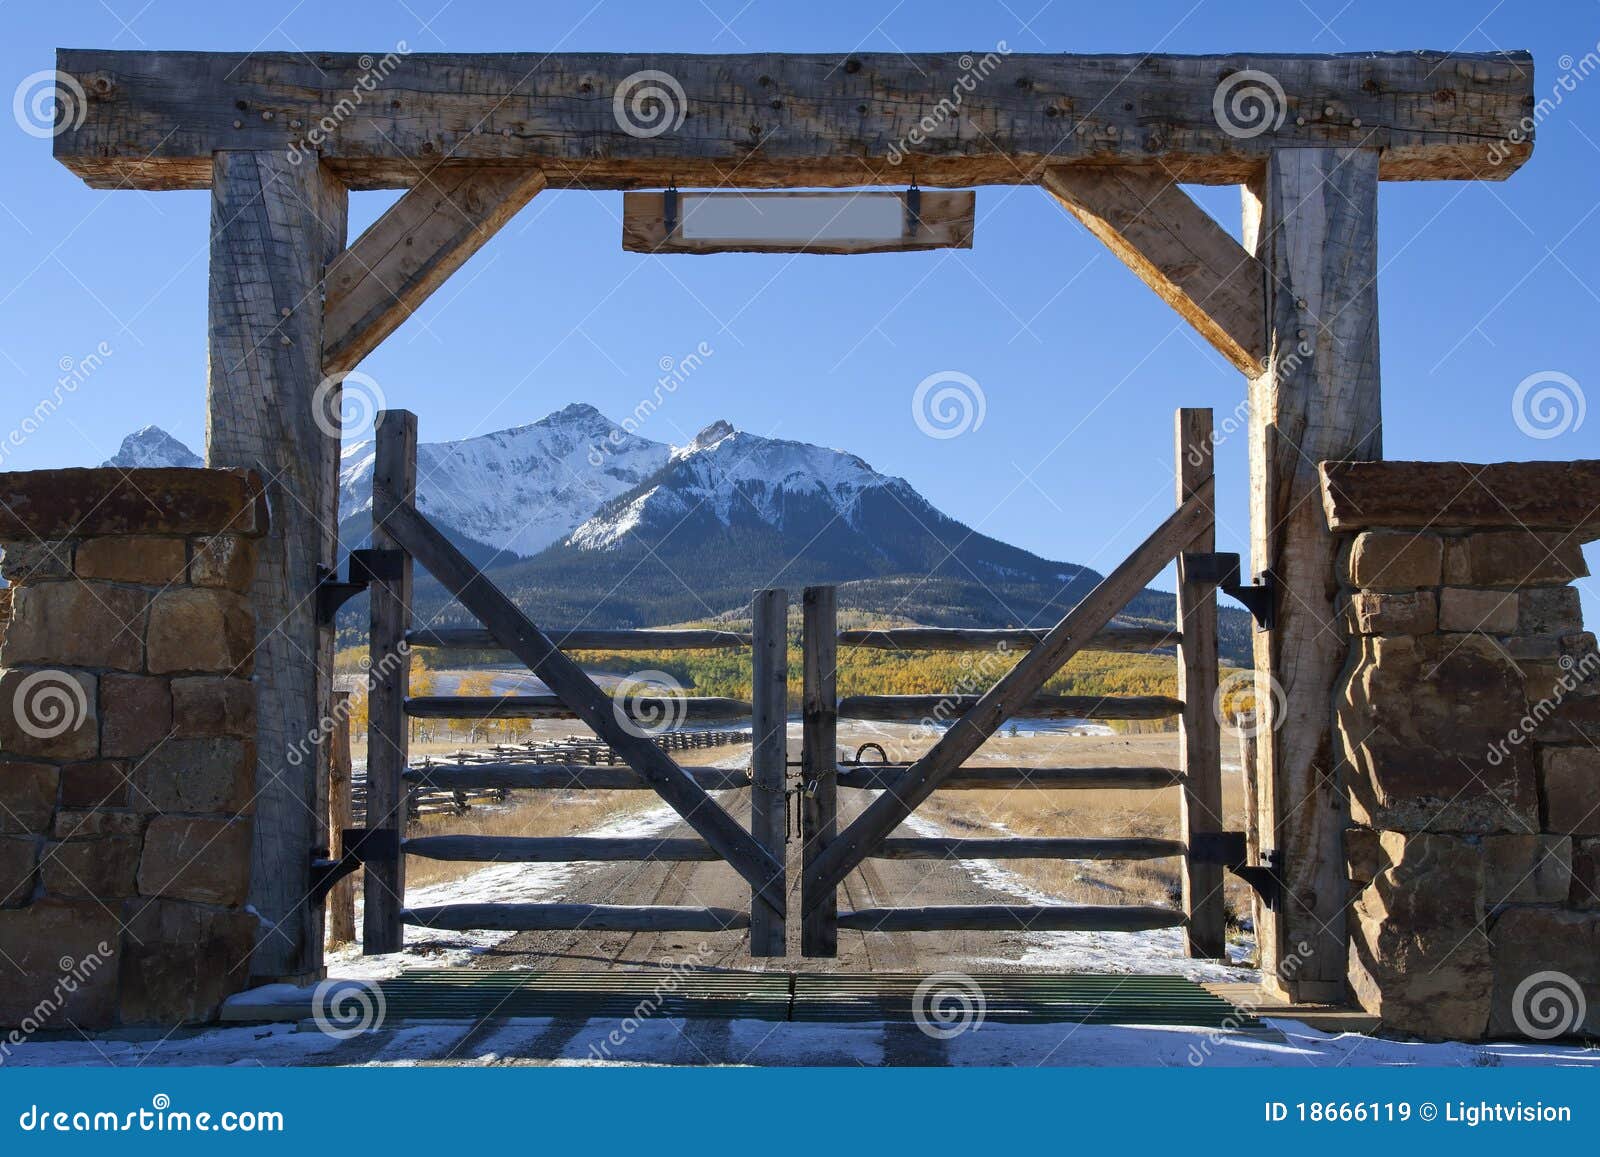 colorado ranch with wooden gate